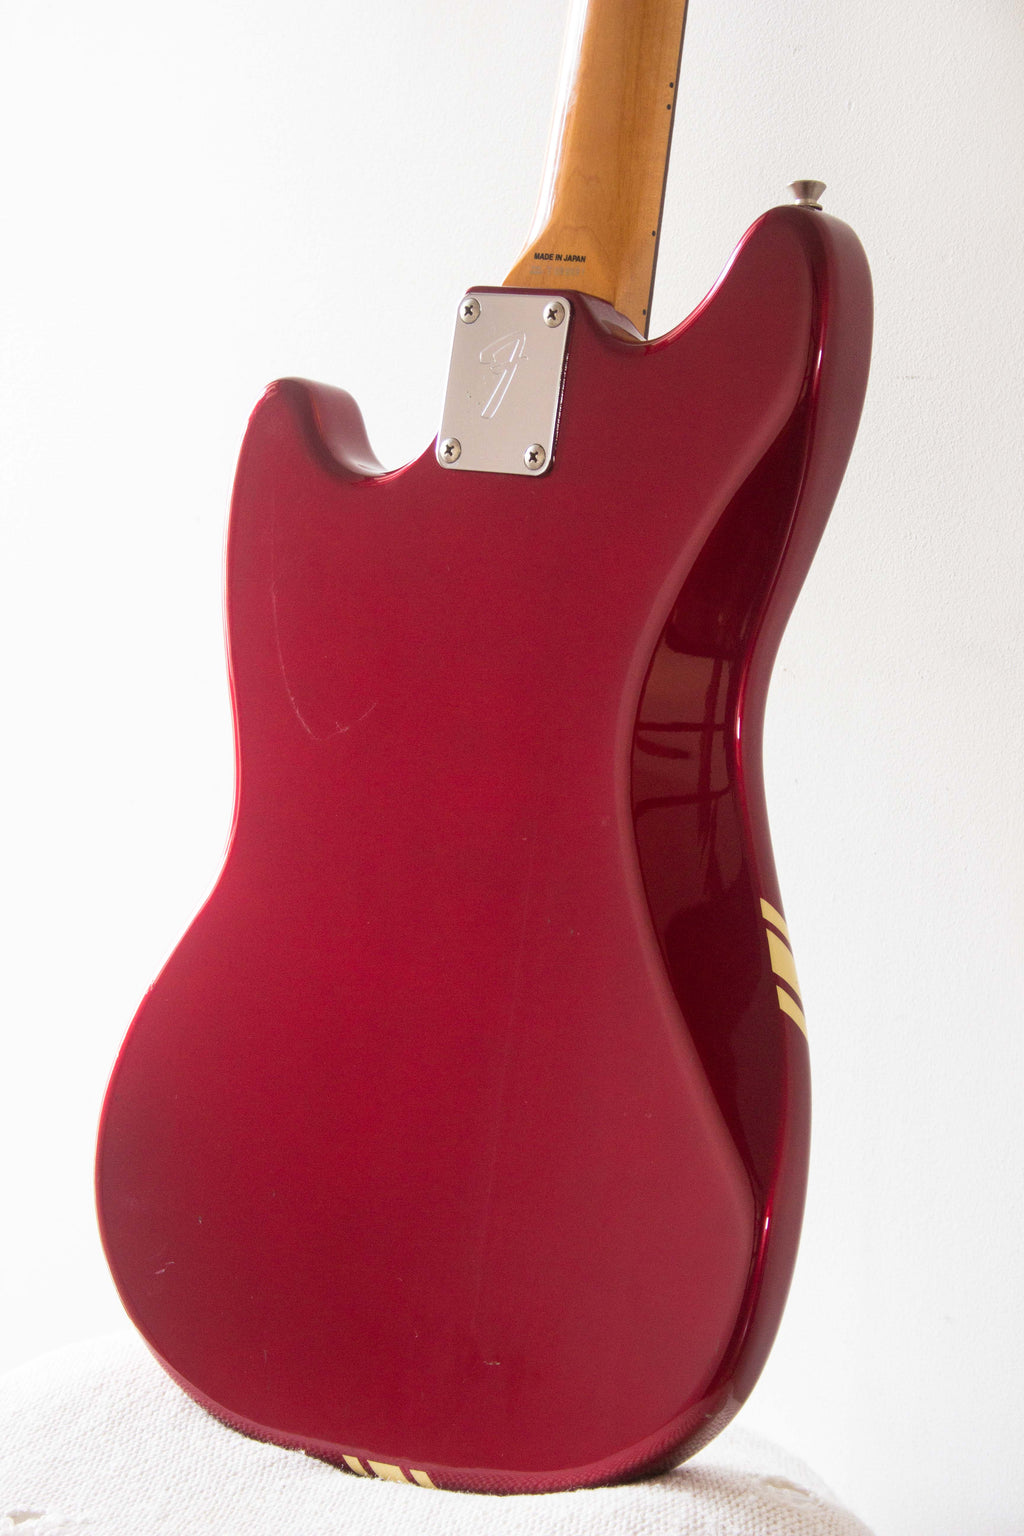 Fender '73 Reissue Competition Mustang MG73-CO Old Candy Apple Red 2007-10